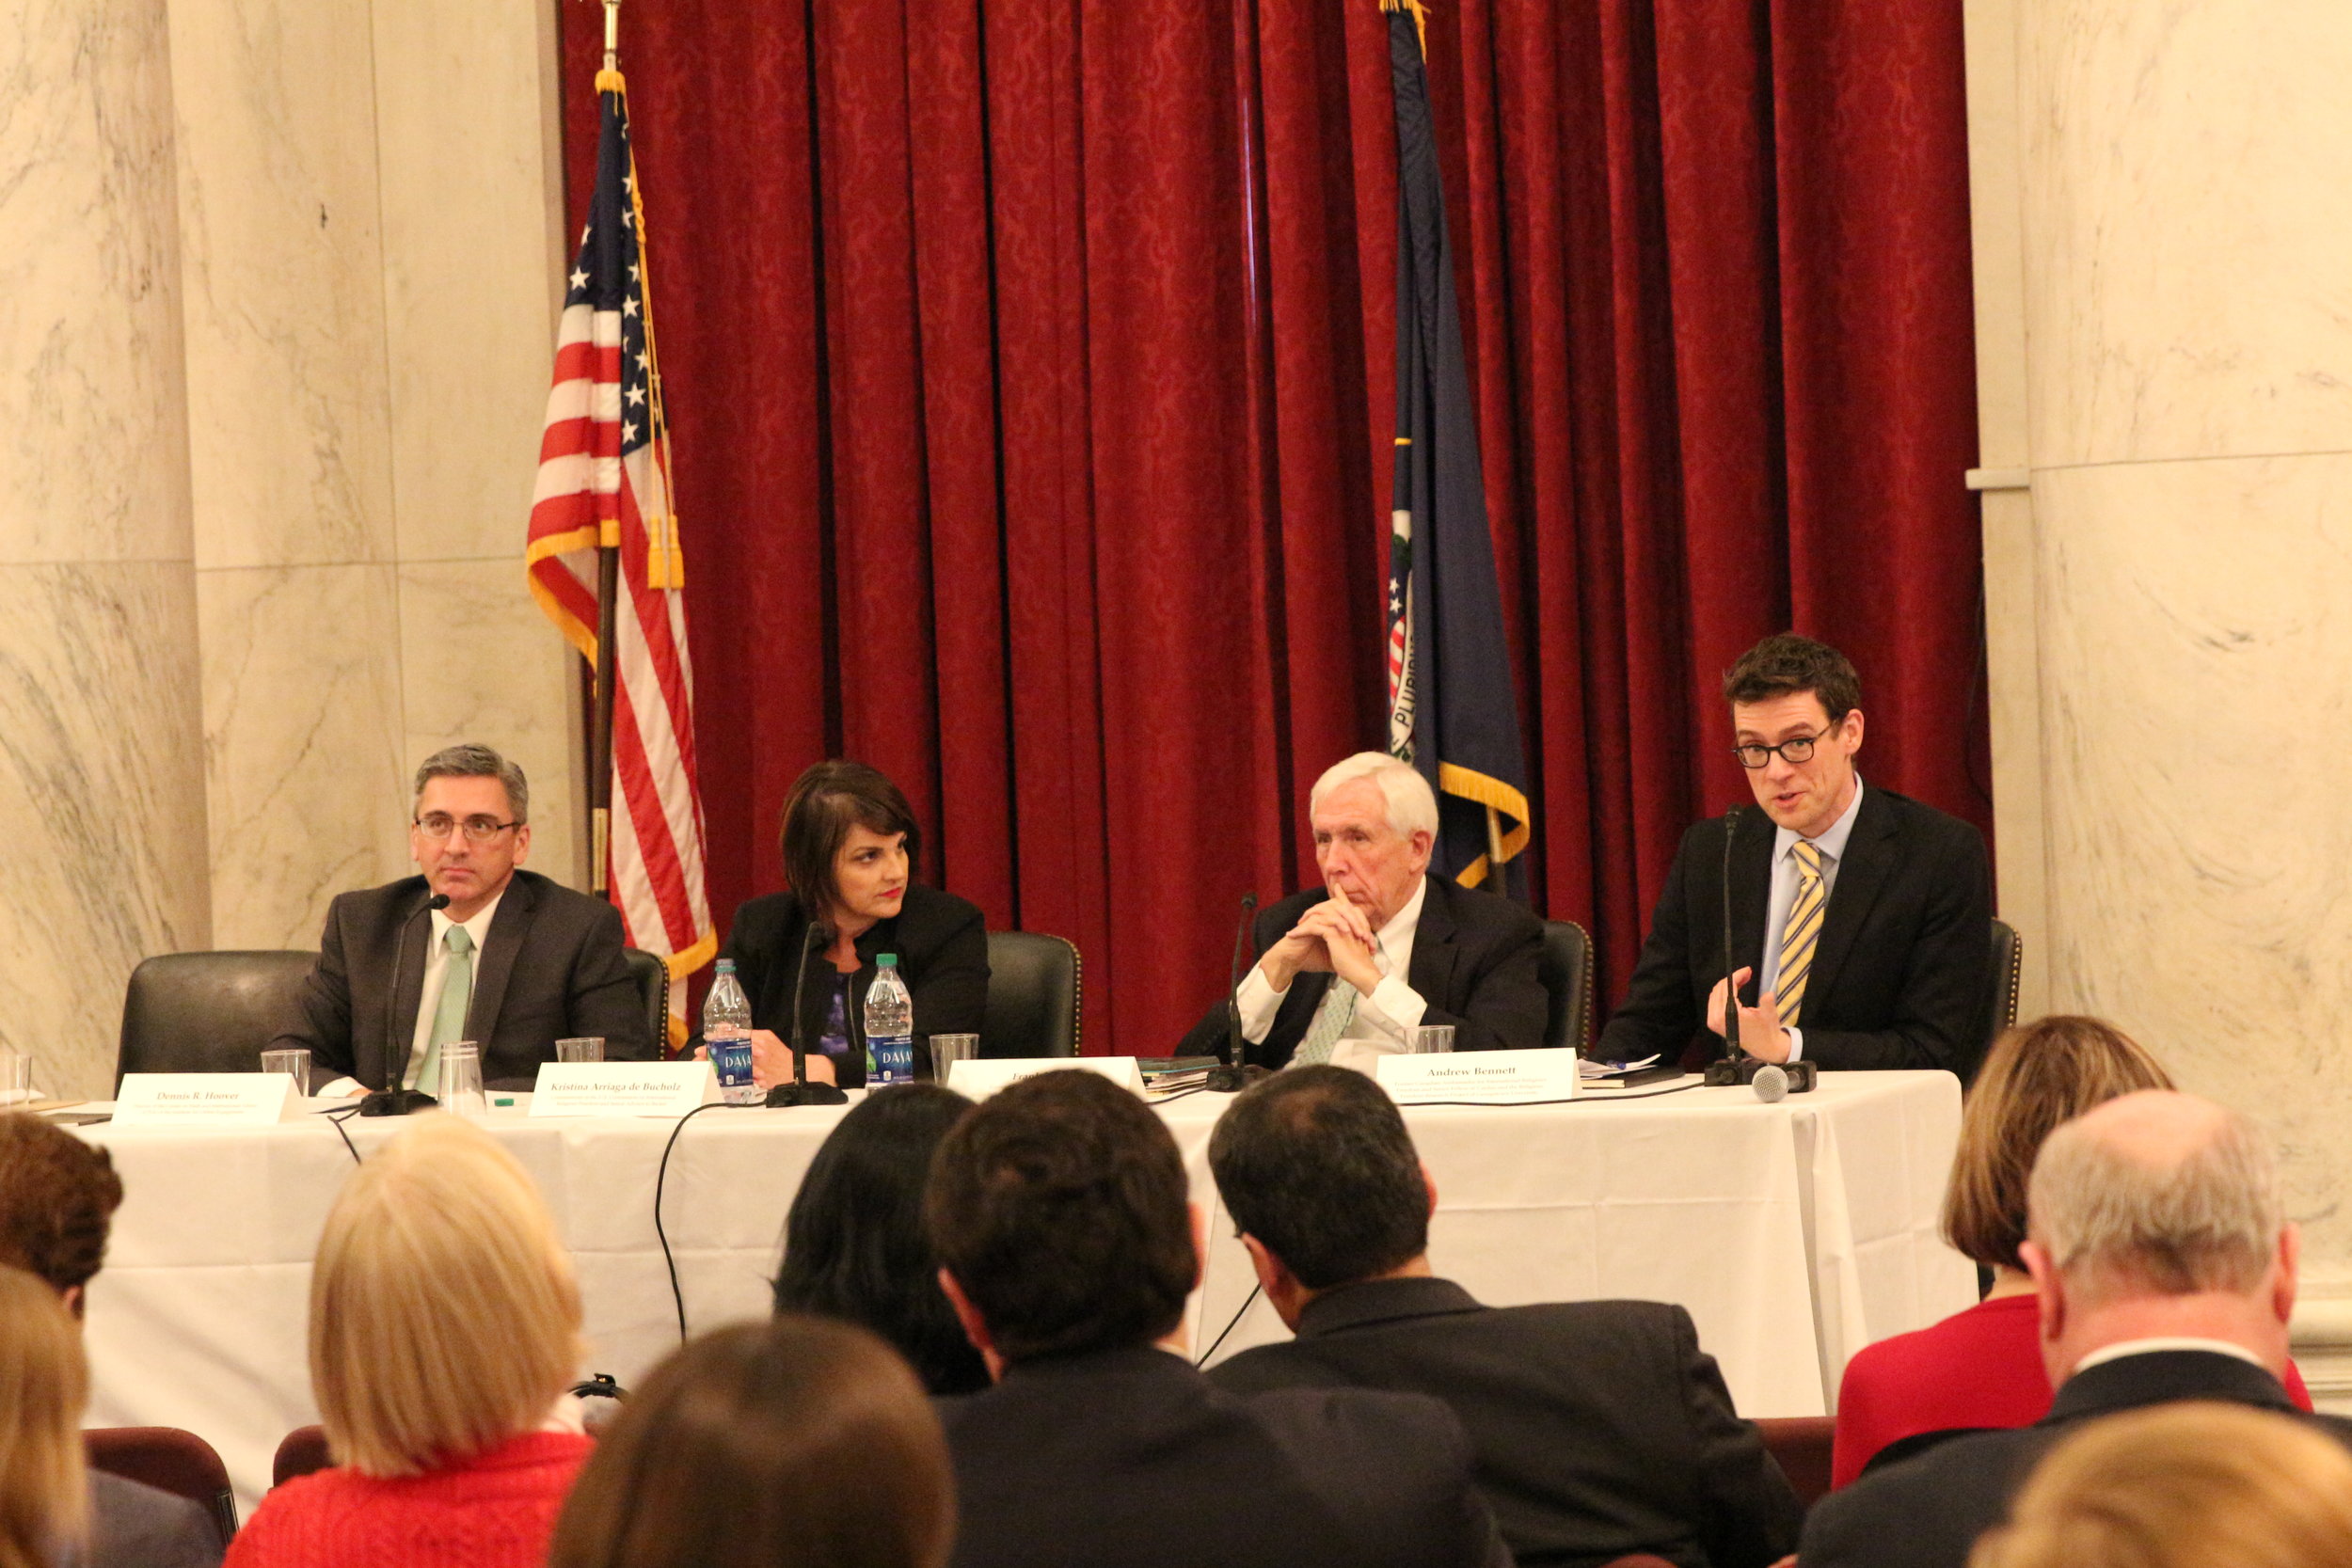  Panelists discussed the next steps to be taken for strengthening religious freedom in the new administration.&nbsp; 